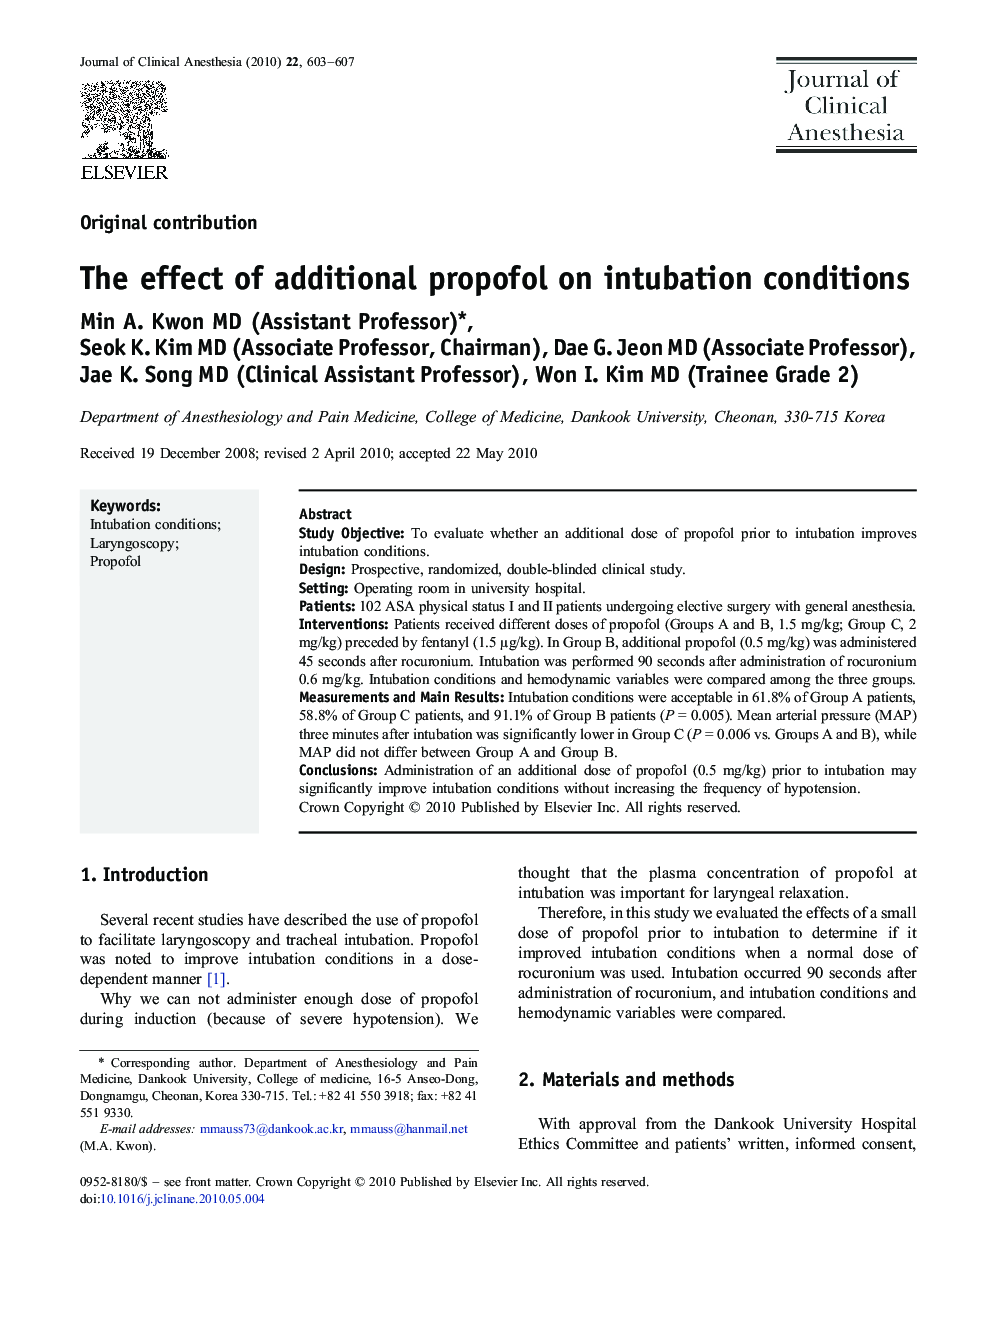 The effect of additional propofol on intubation conditions